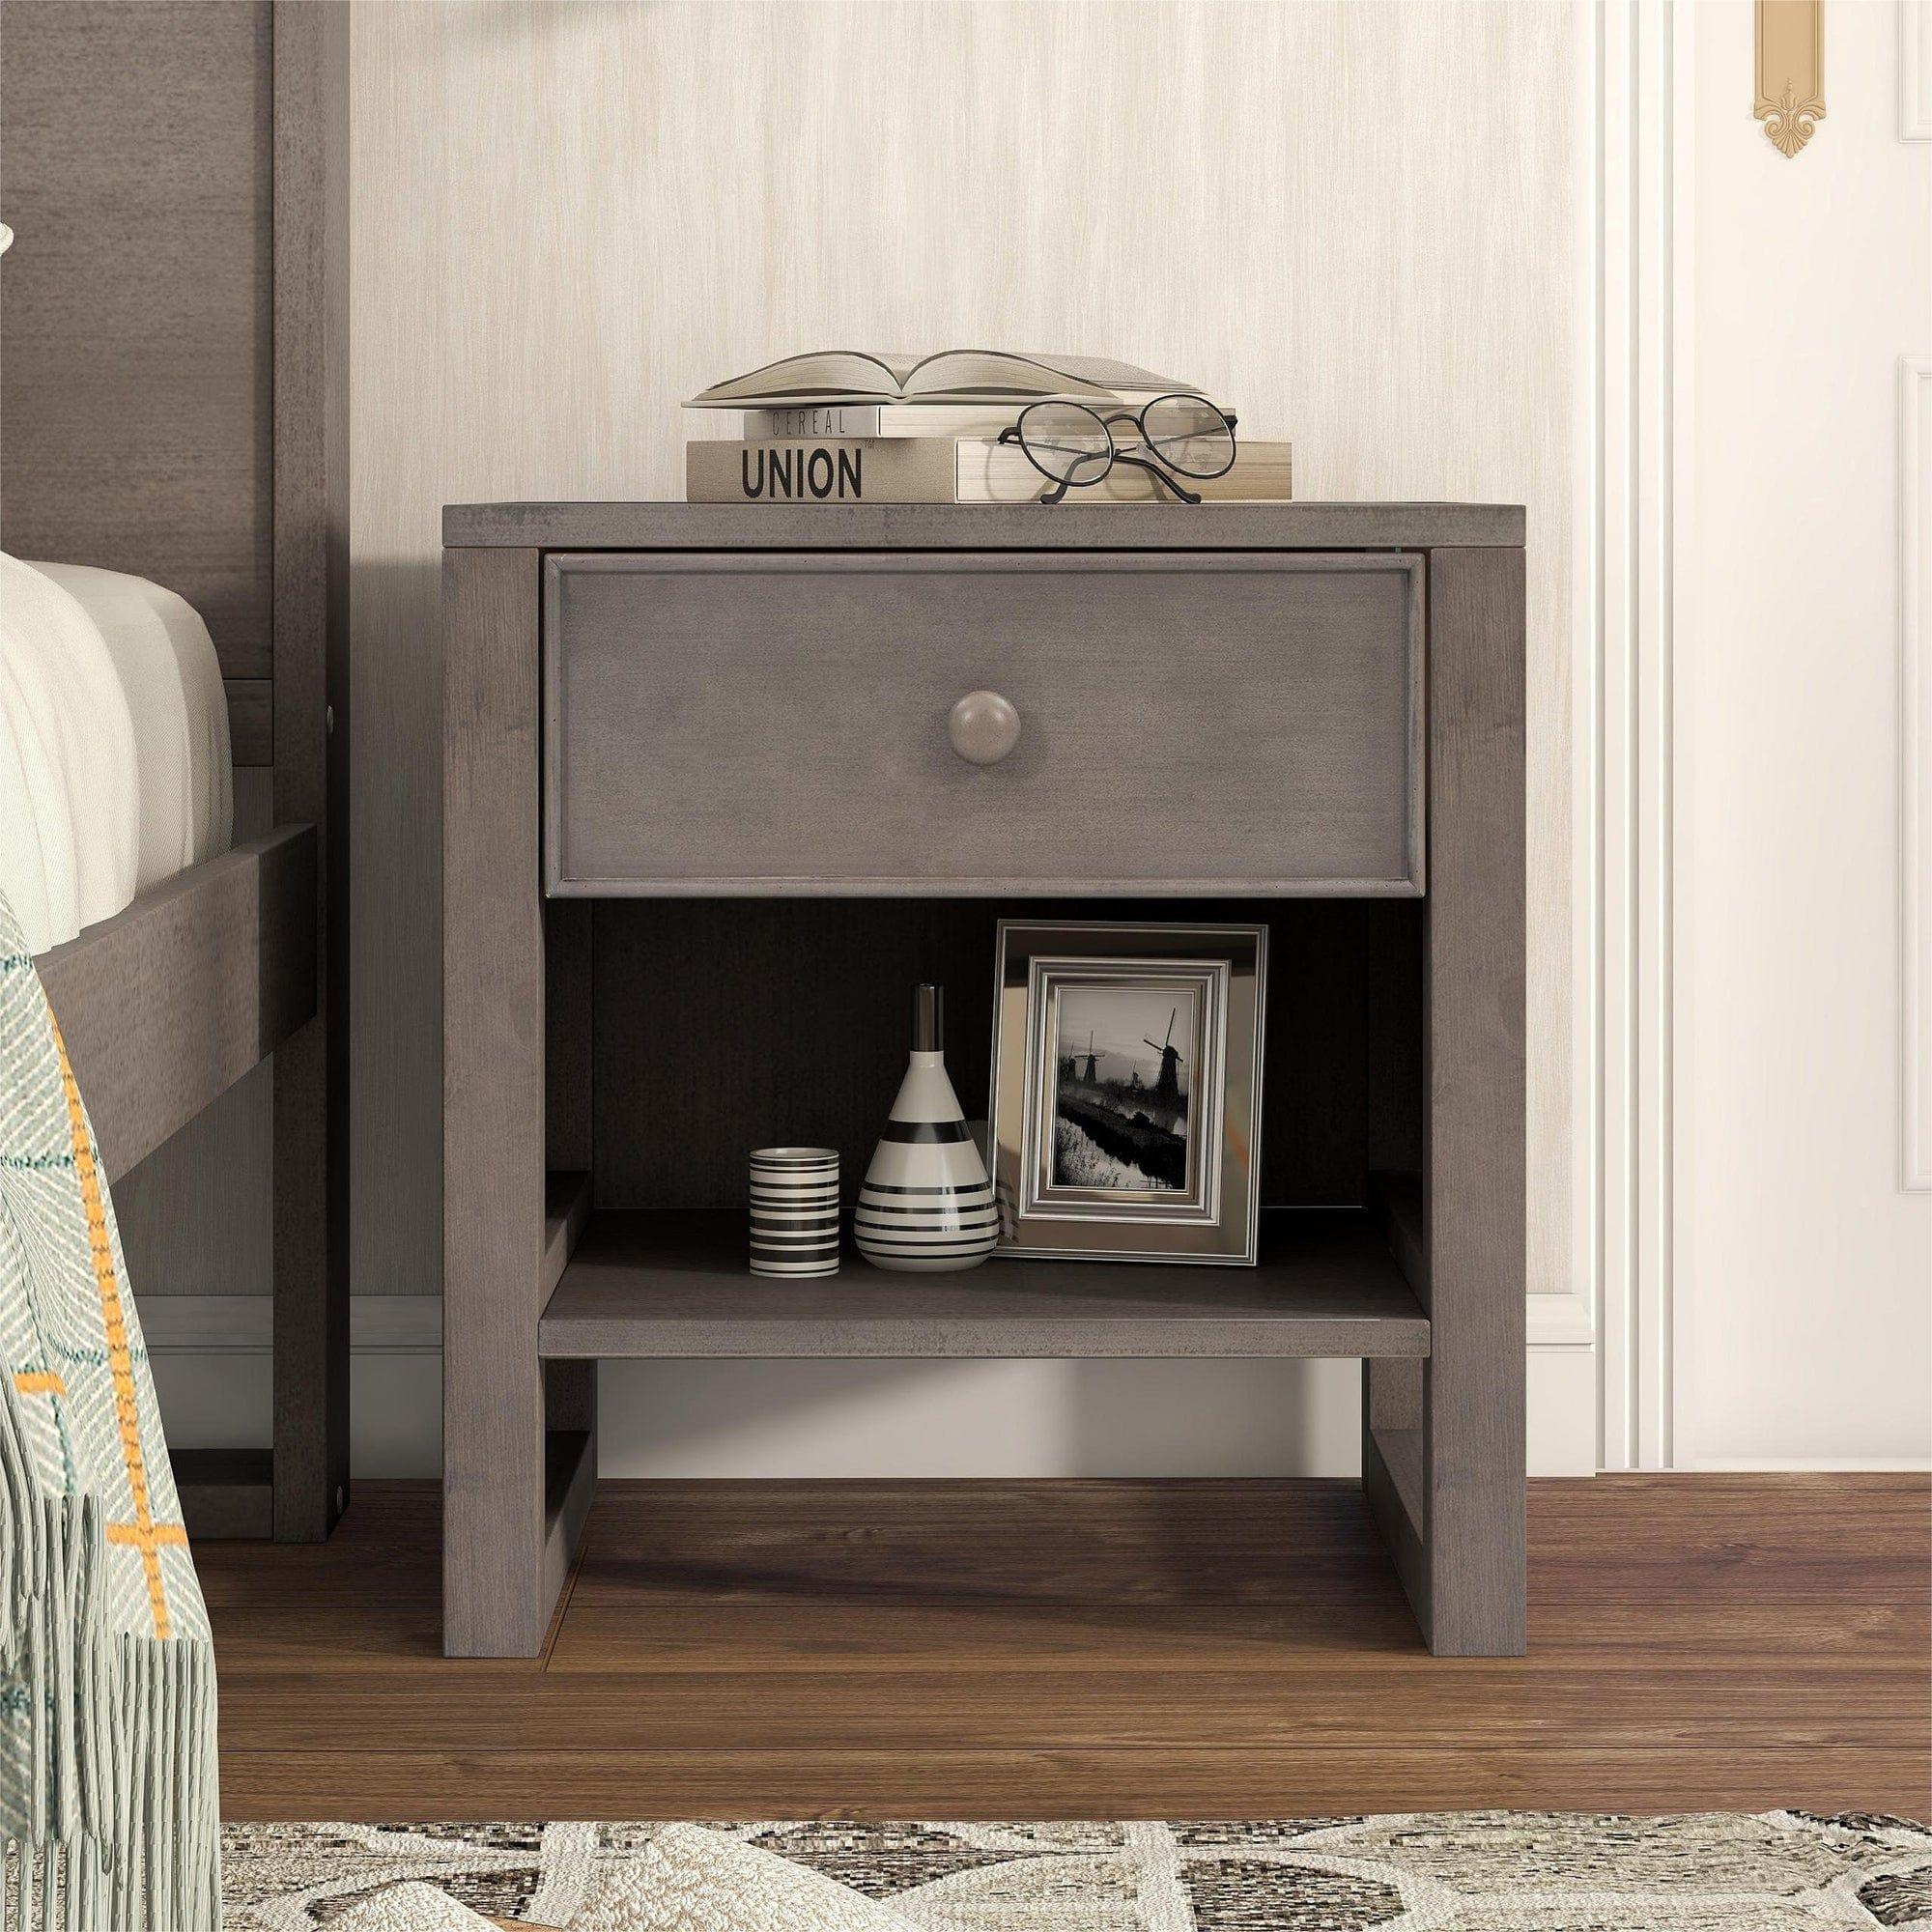 Shop Wooden Nightstand with a Drawer and an Open Storage,End Table for Bedroom,Anitque Gray Mademoiselle Home Decor